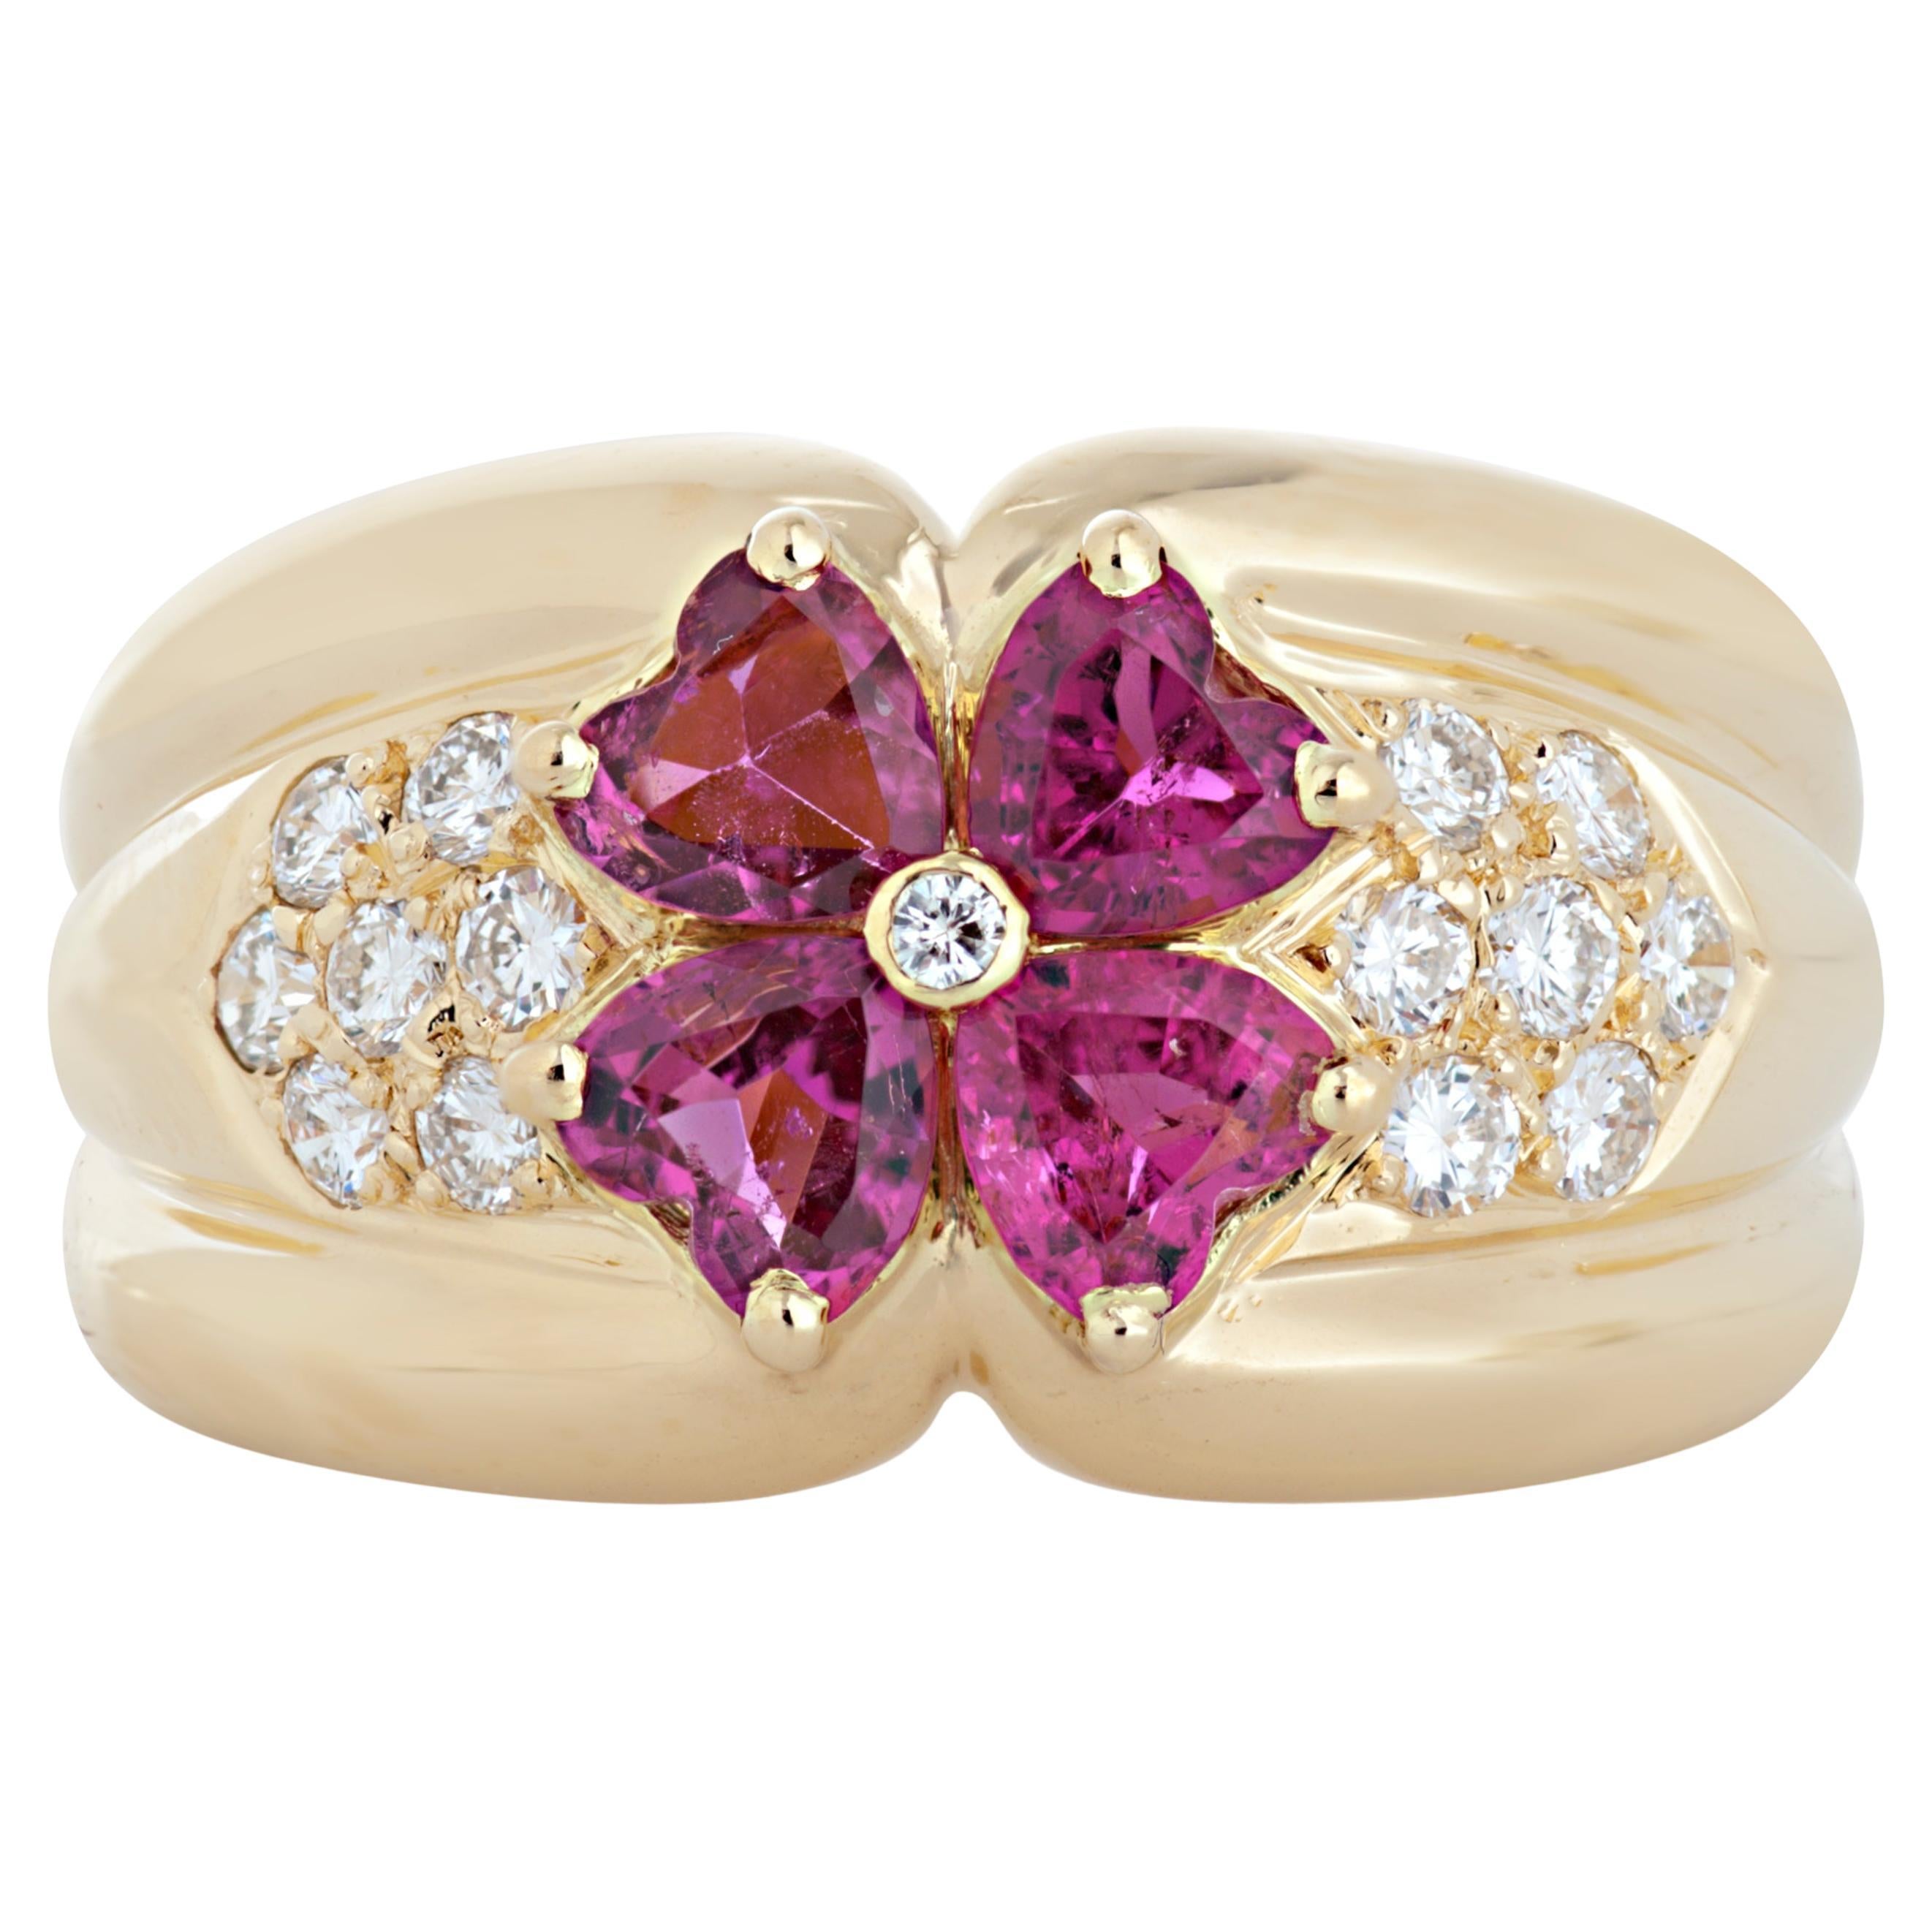 Van Cleef & Arpels Diamond and Pink Tourmaline Flower Ring in 18k Yellow Gold